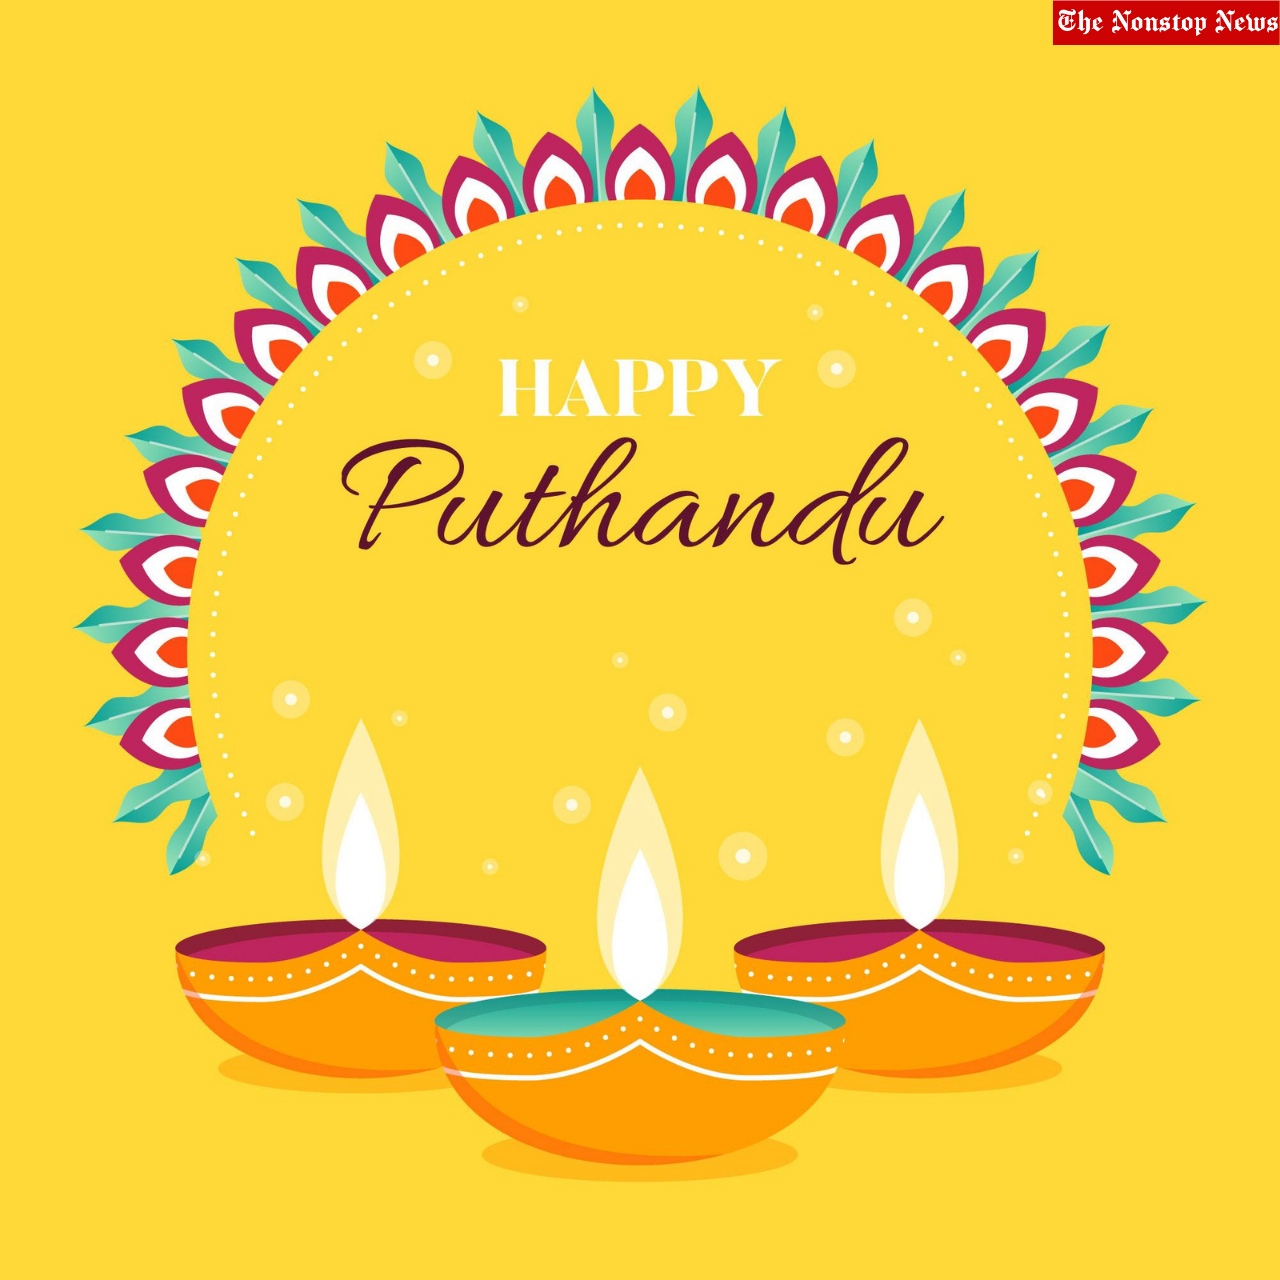 Happy Puthandu 2022: Wishes, Quotes, Messages, Greetings, Images To Share